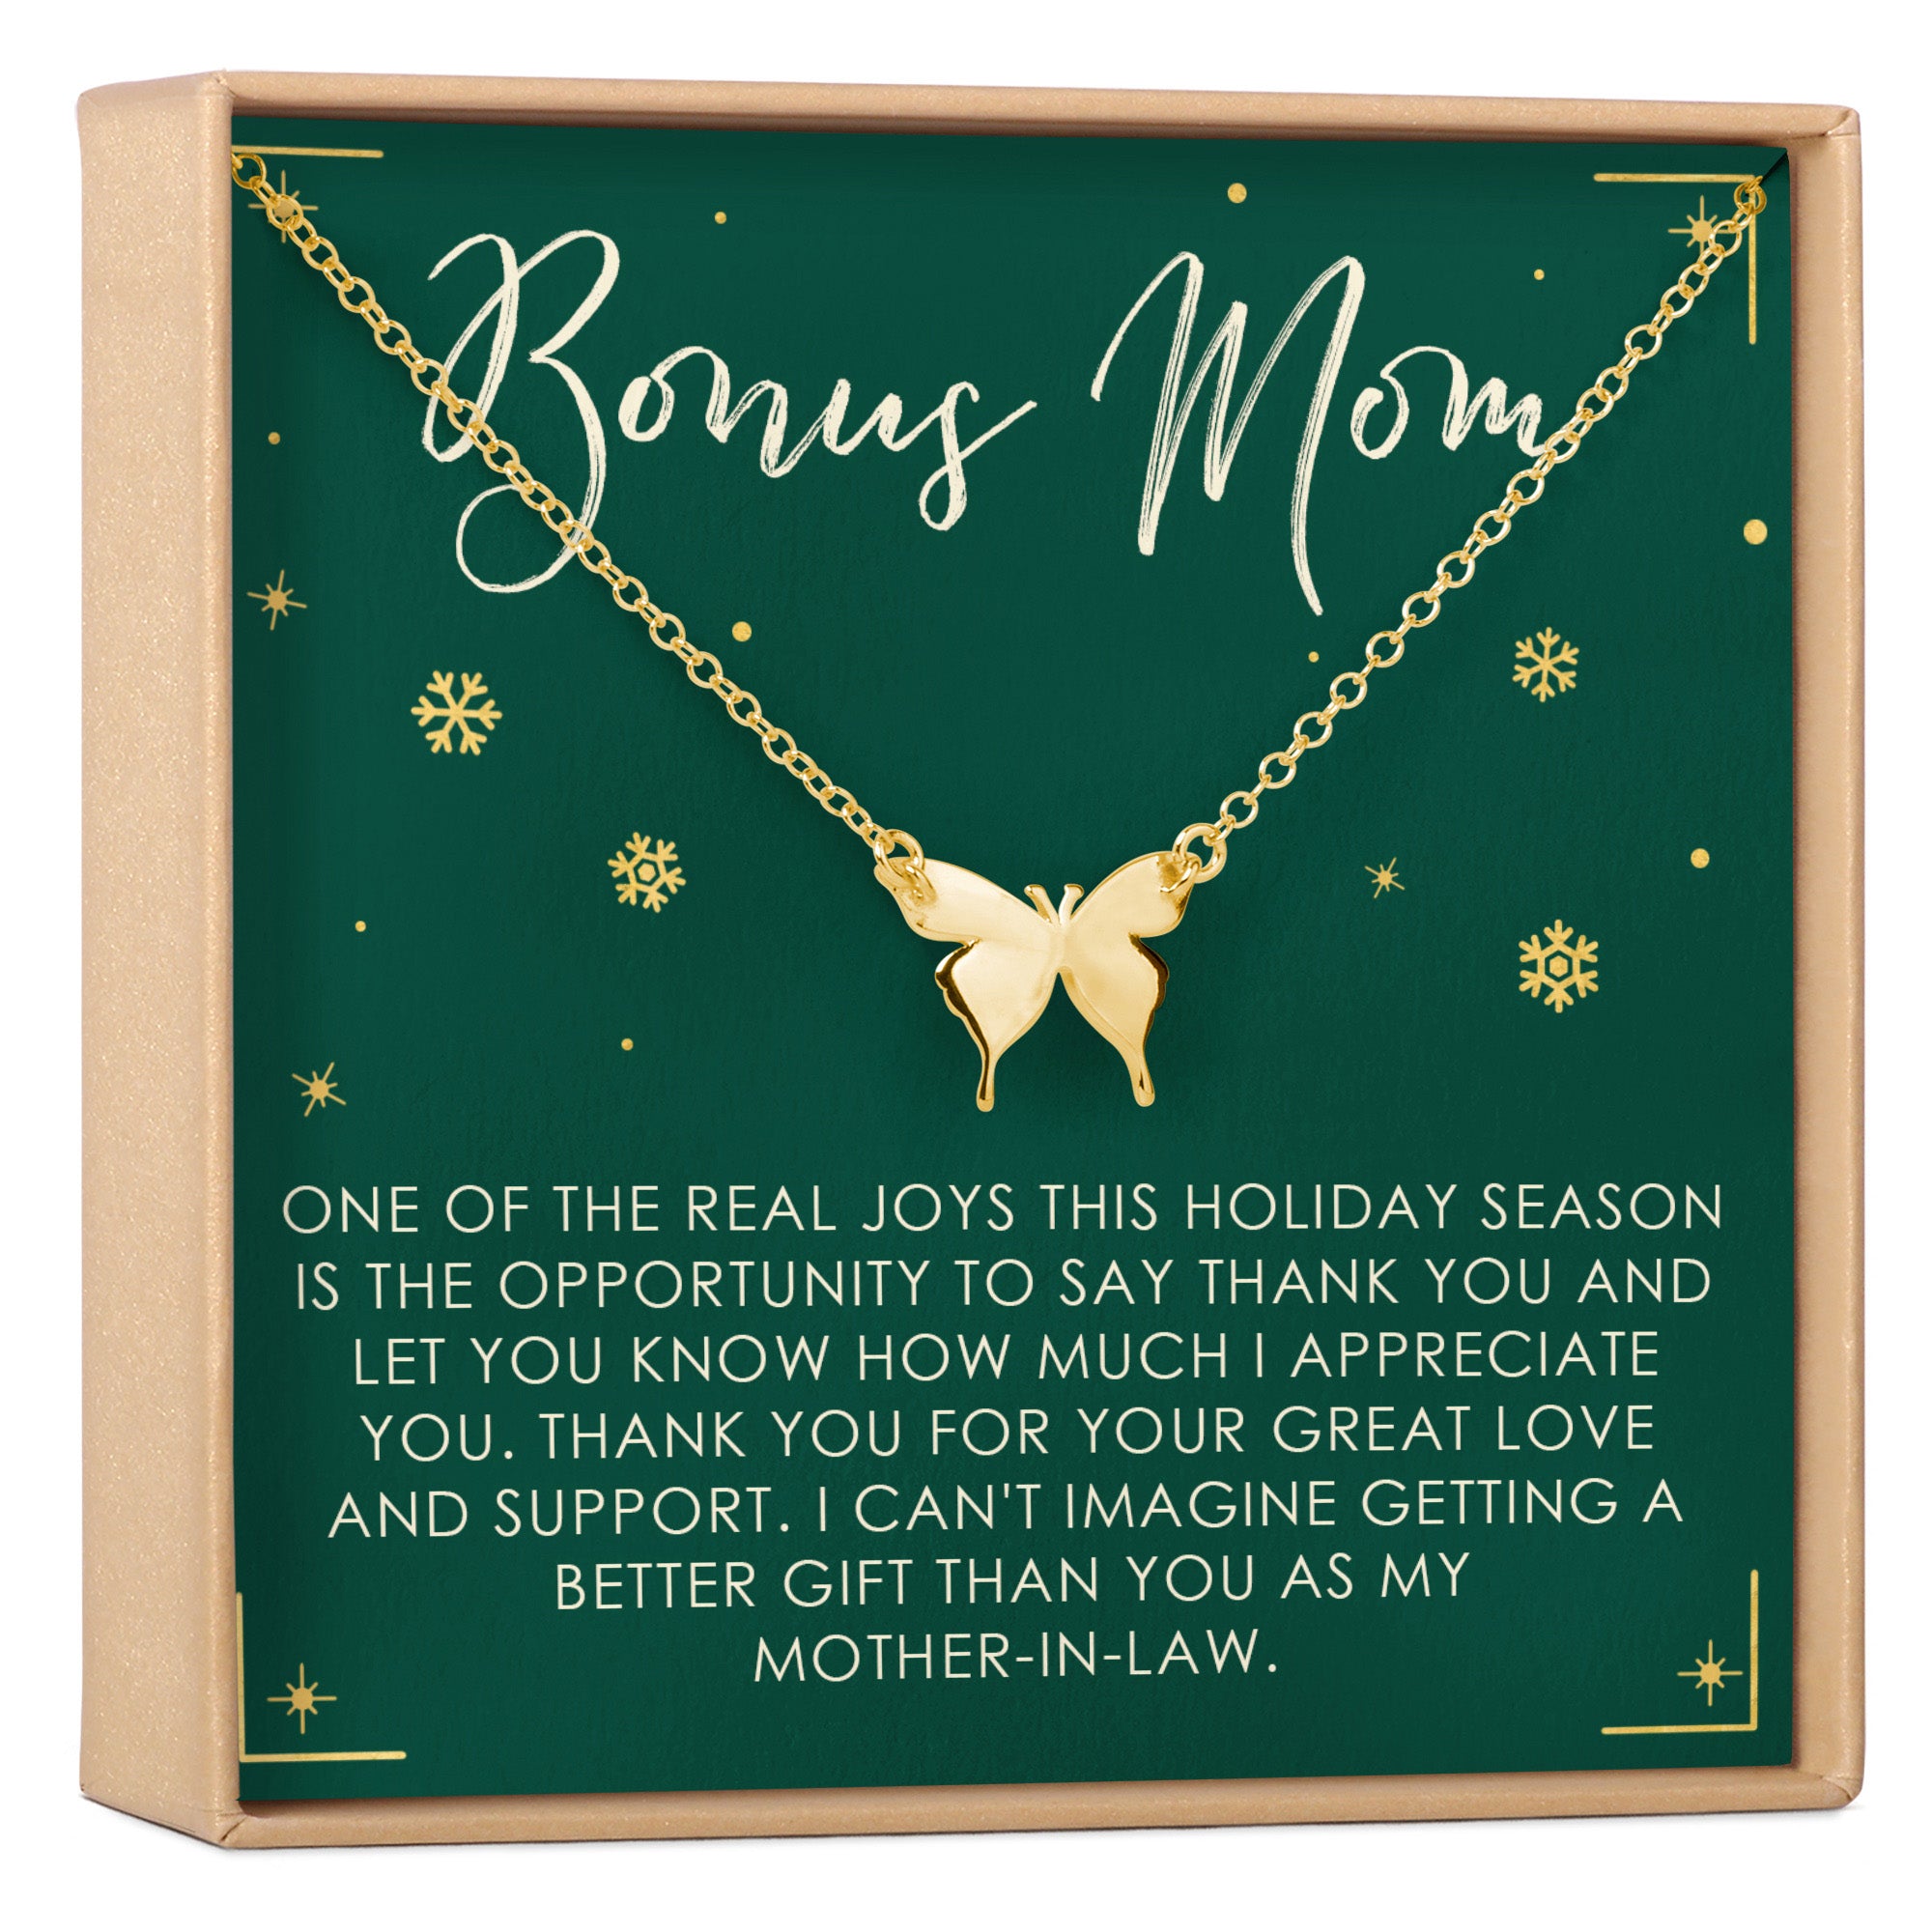 Christmas Gift for Mother in Law: Present, Necklace, Jewelry, Xmas Gift, Gift Idea for Mother in Law, Husband's Mom, Multiple Styles, Butterfly / Gold